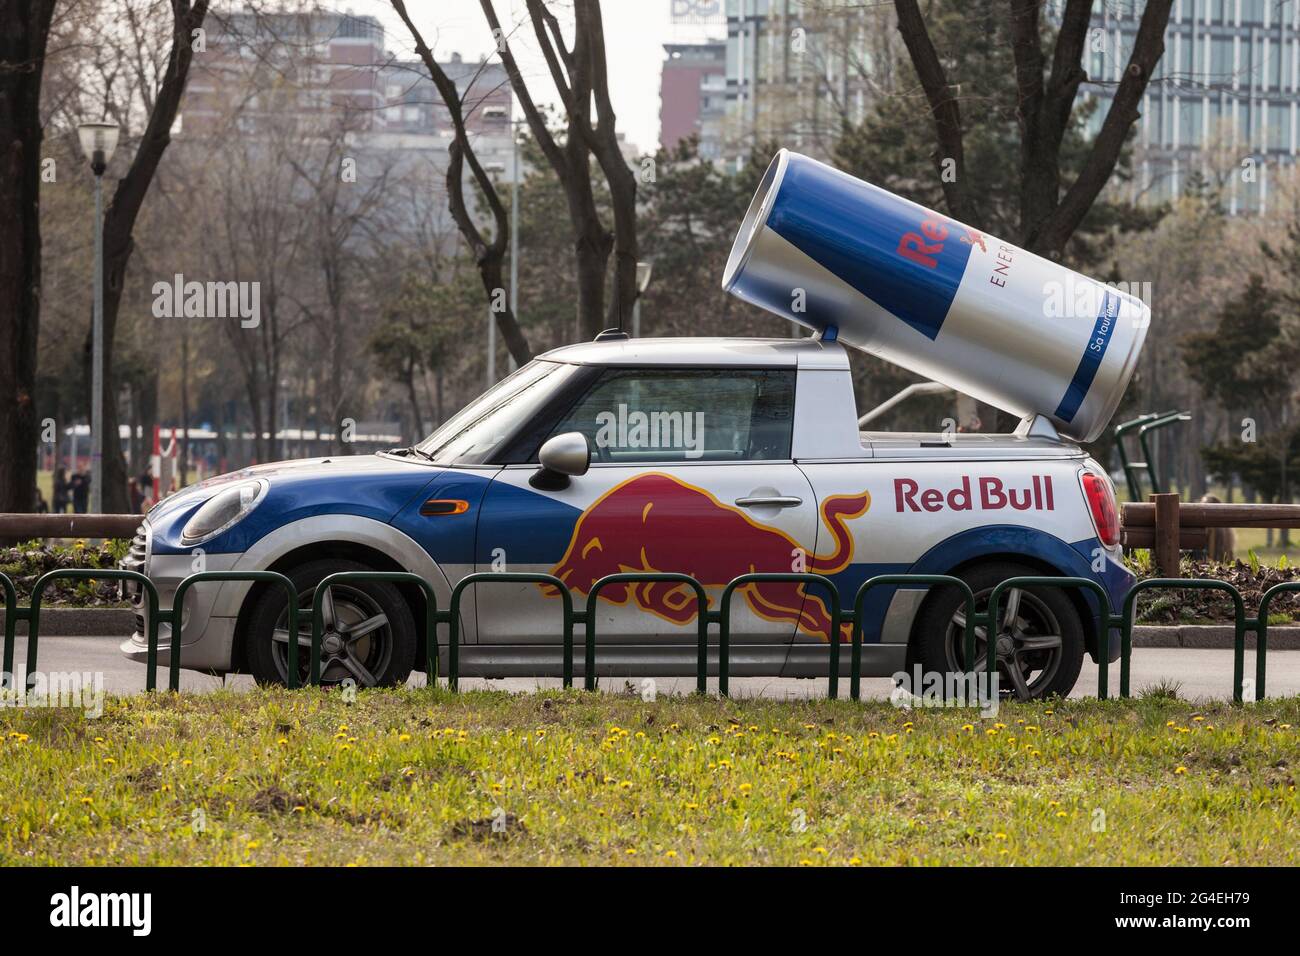 Picture of a car with a gian can it with the promotional logo of Red bull. Bull is an energy drink sold Red Bull GmbH, an Austrian c